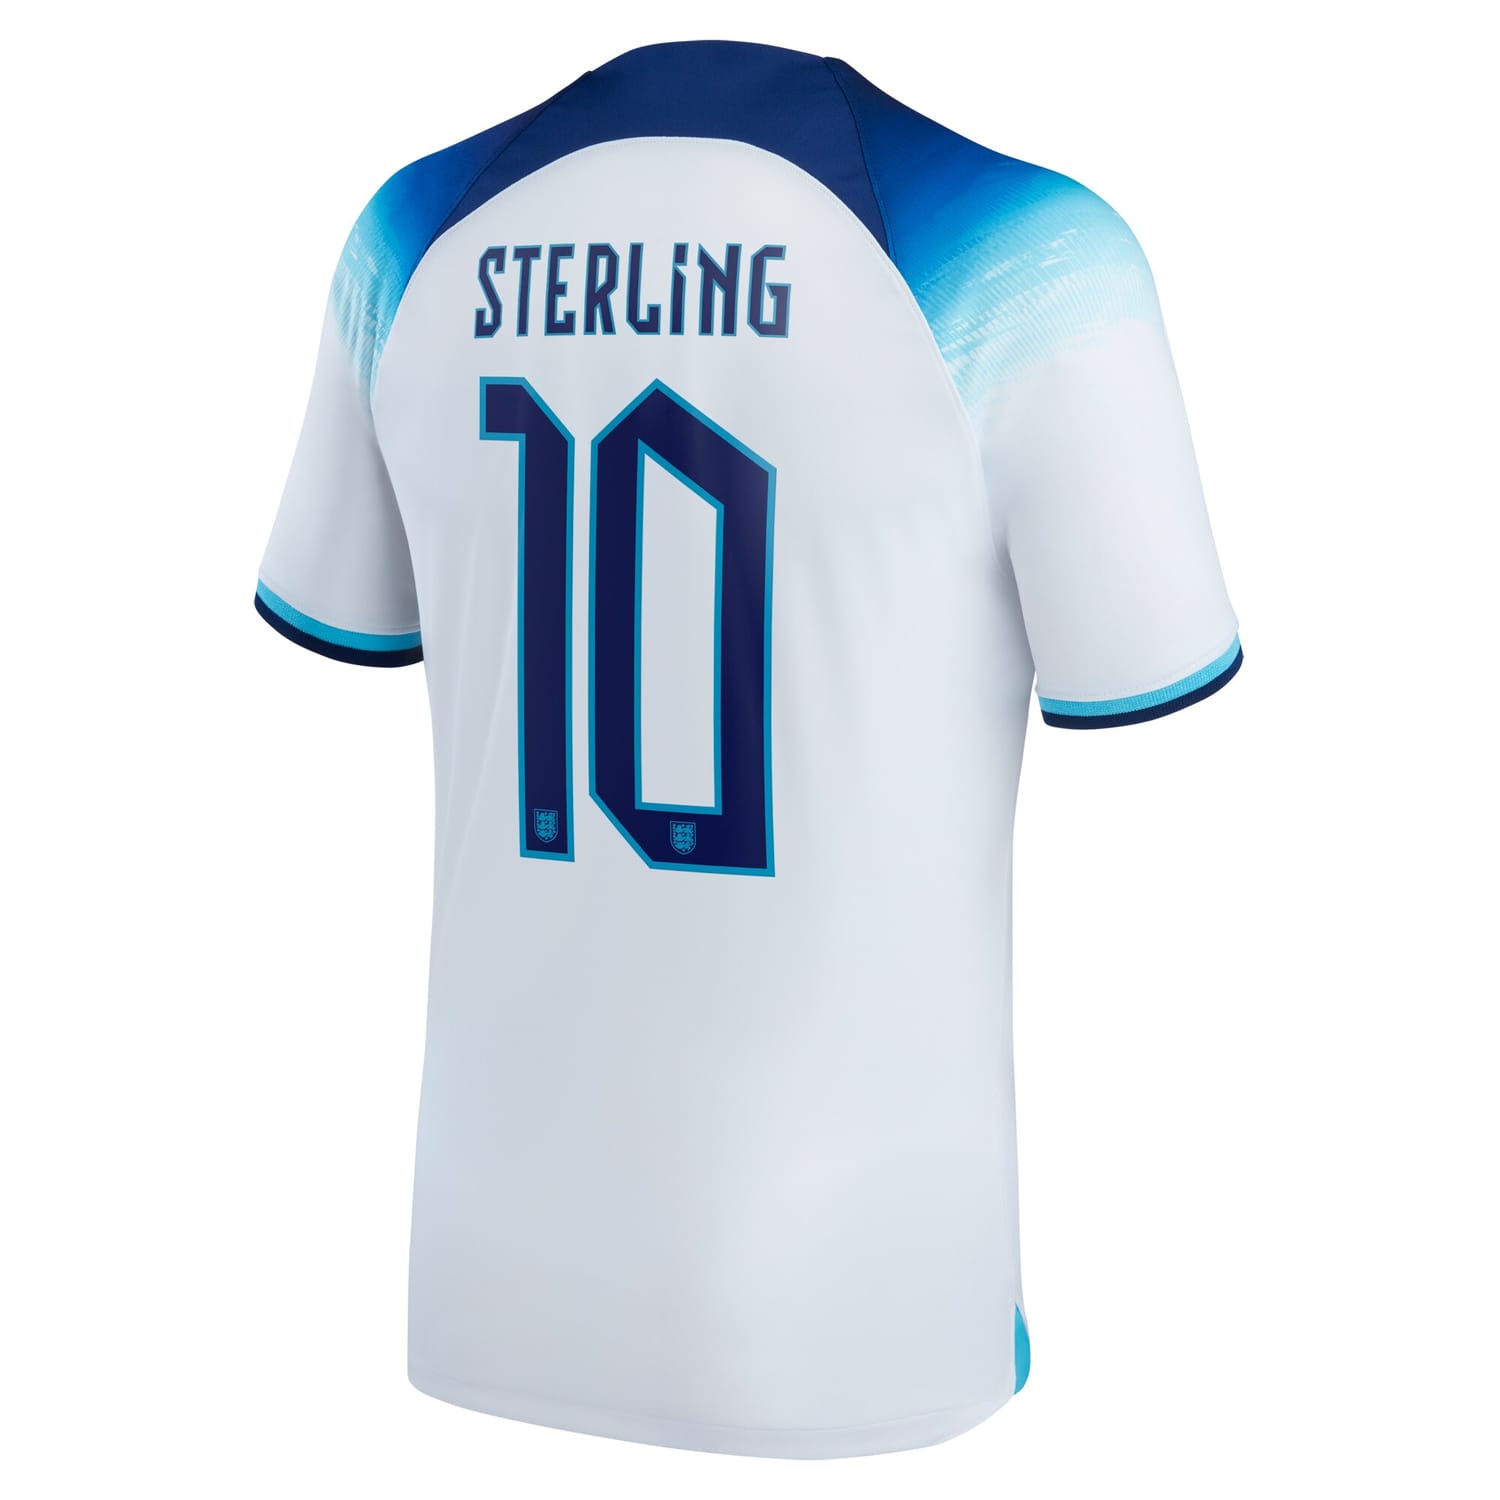 England National Team Home Jersey Shirt White 2022-23 player Raheem Sterling printing for Men